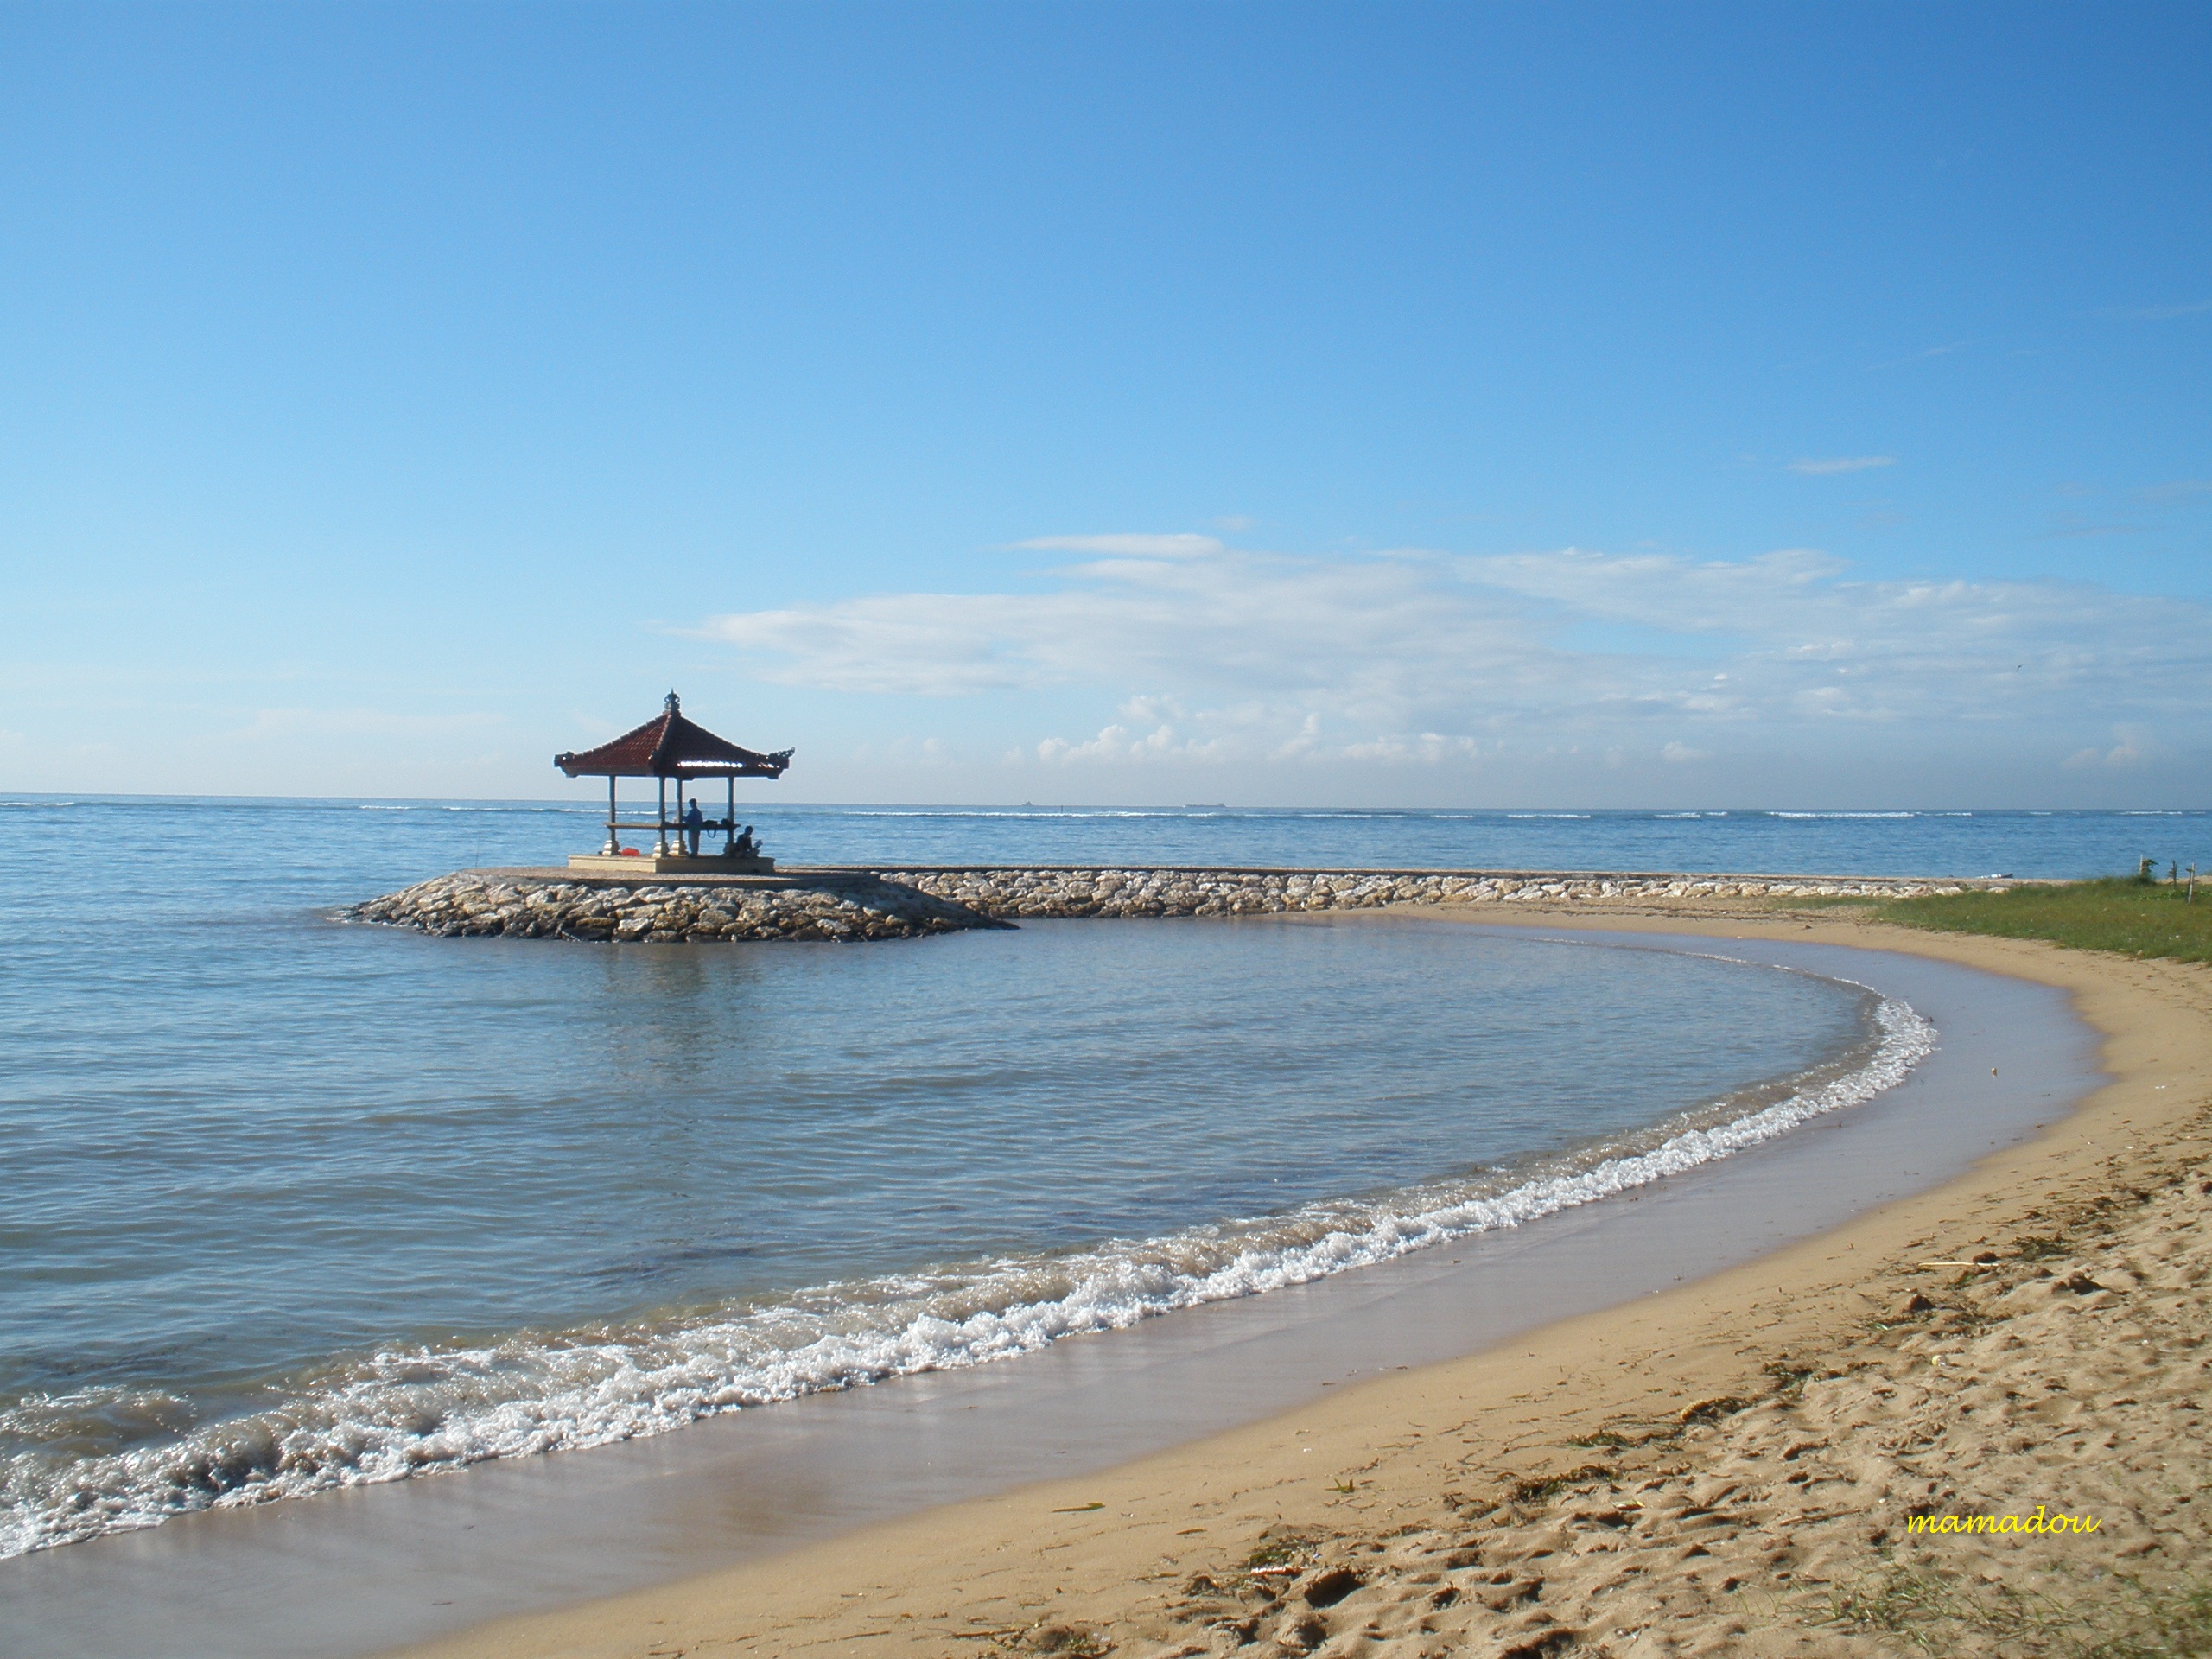 Download this Sanur Bali picture